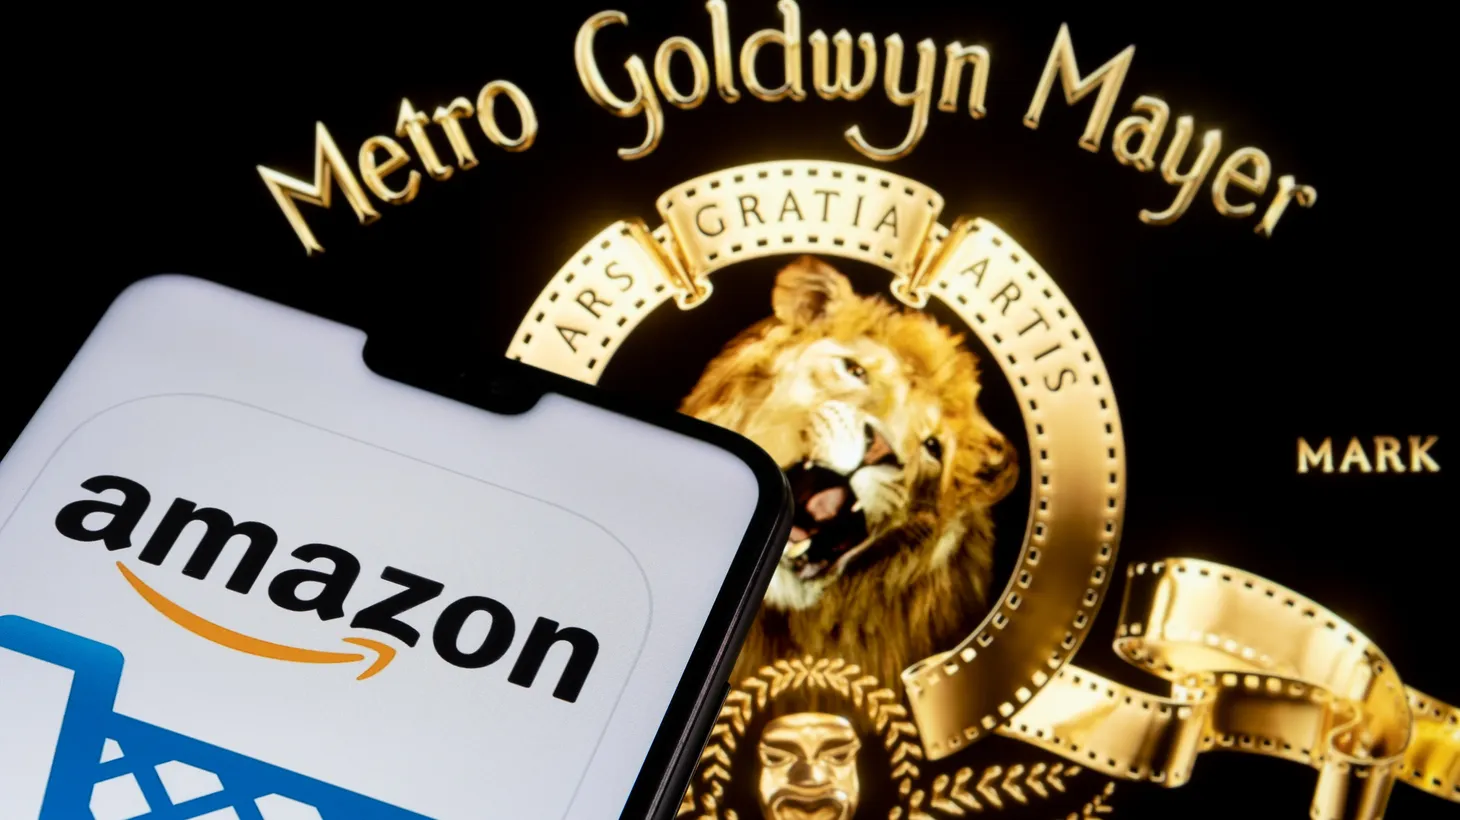 The deal has just finalized, and Amazon is the new owner of the movie studio MGM.